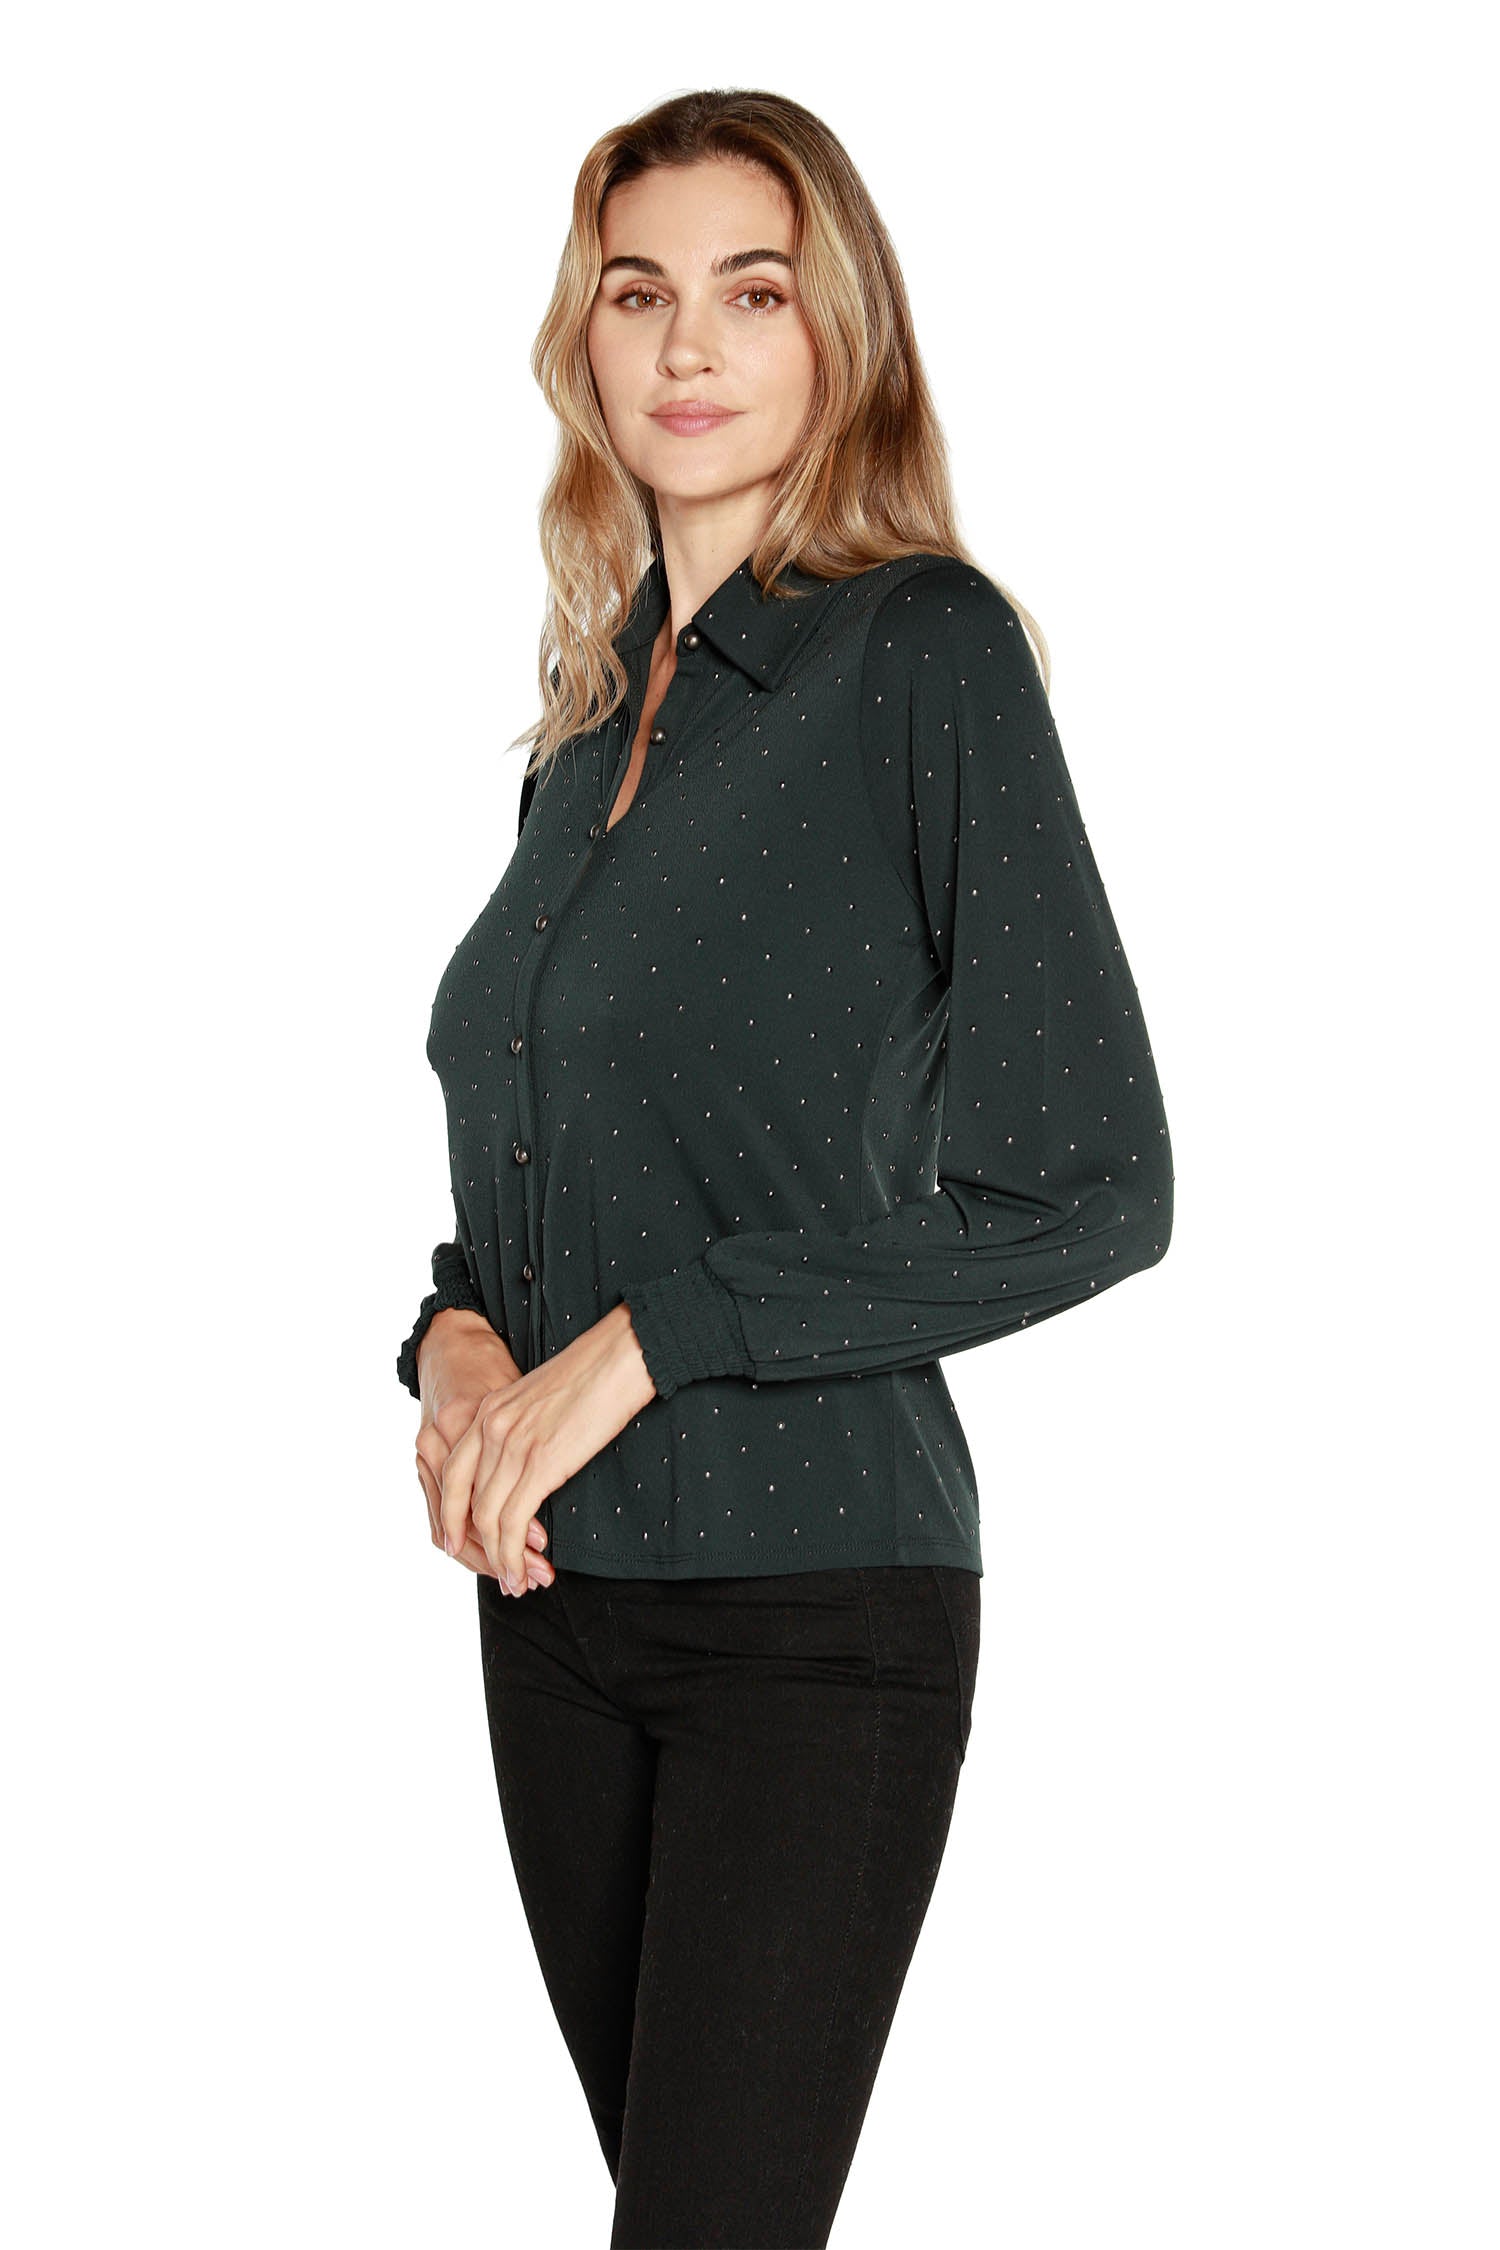 Women's Button Front Blouse with Long Blouson Sleeves with Metallic Studs